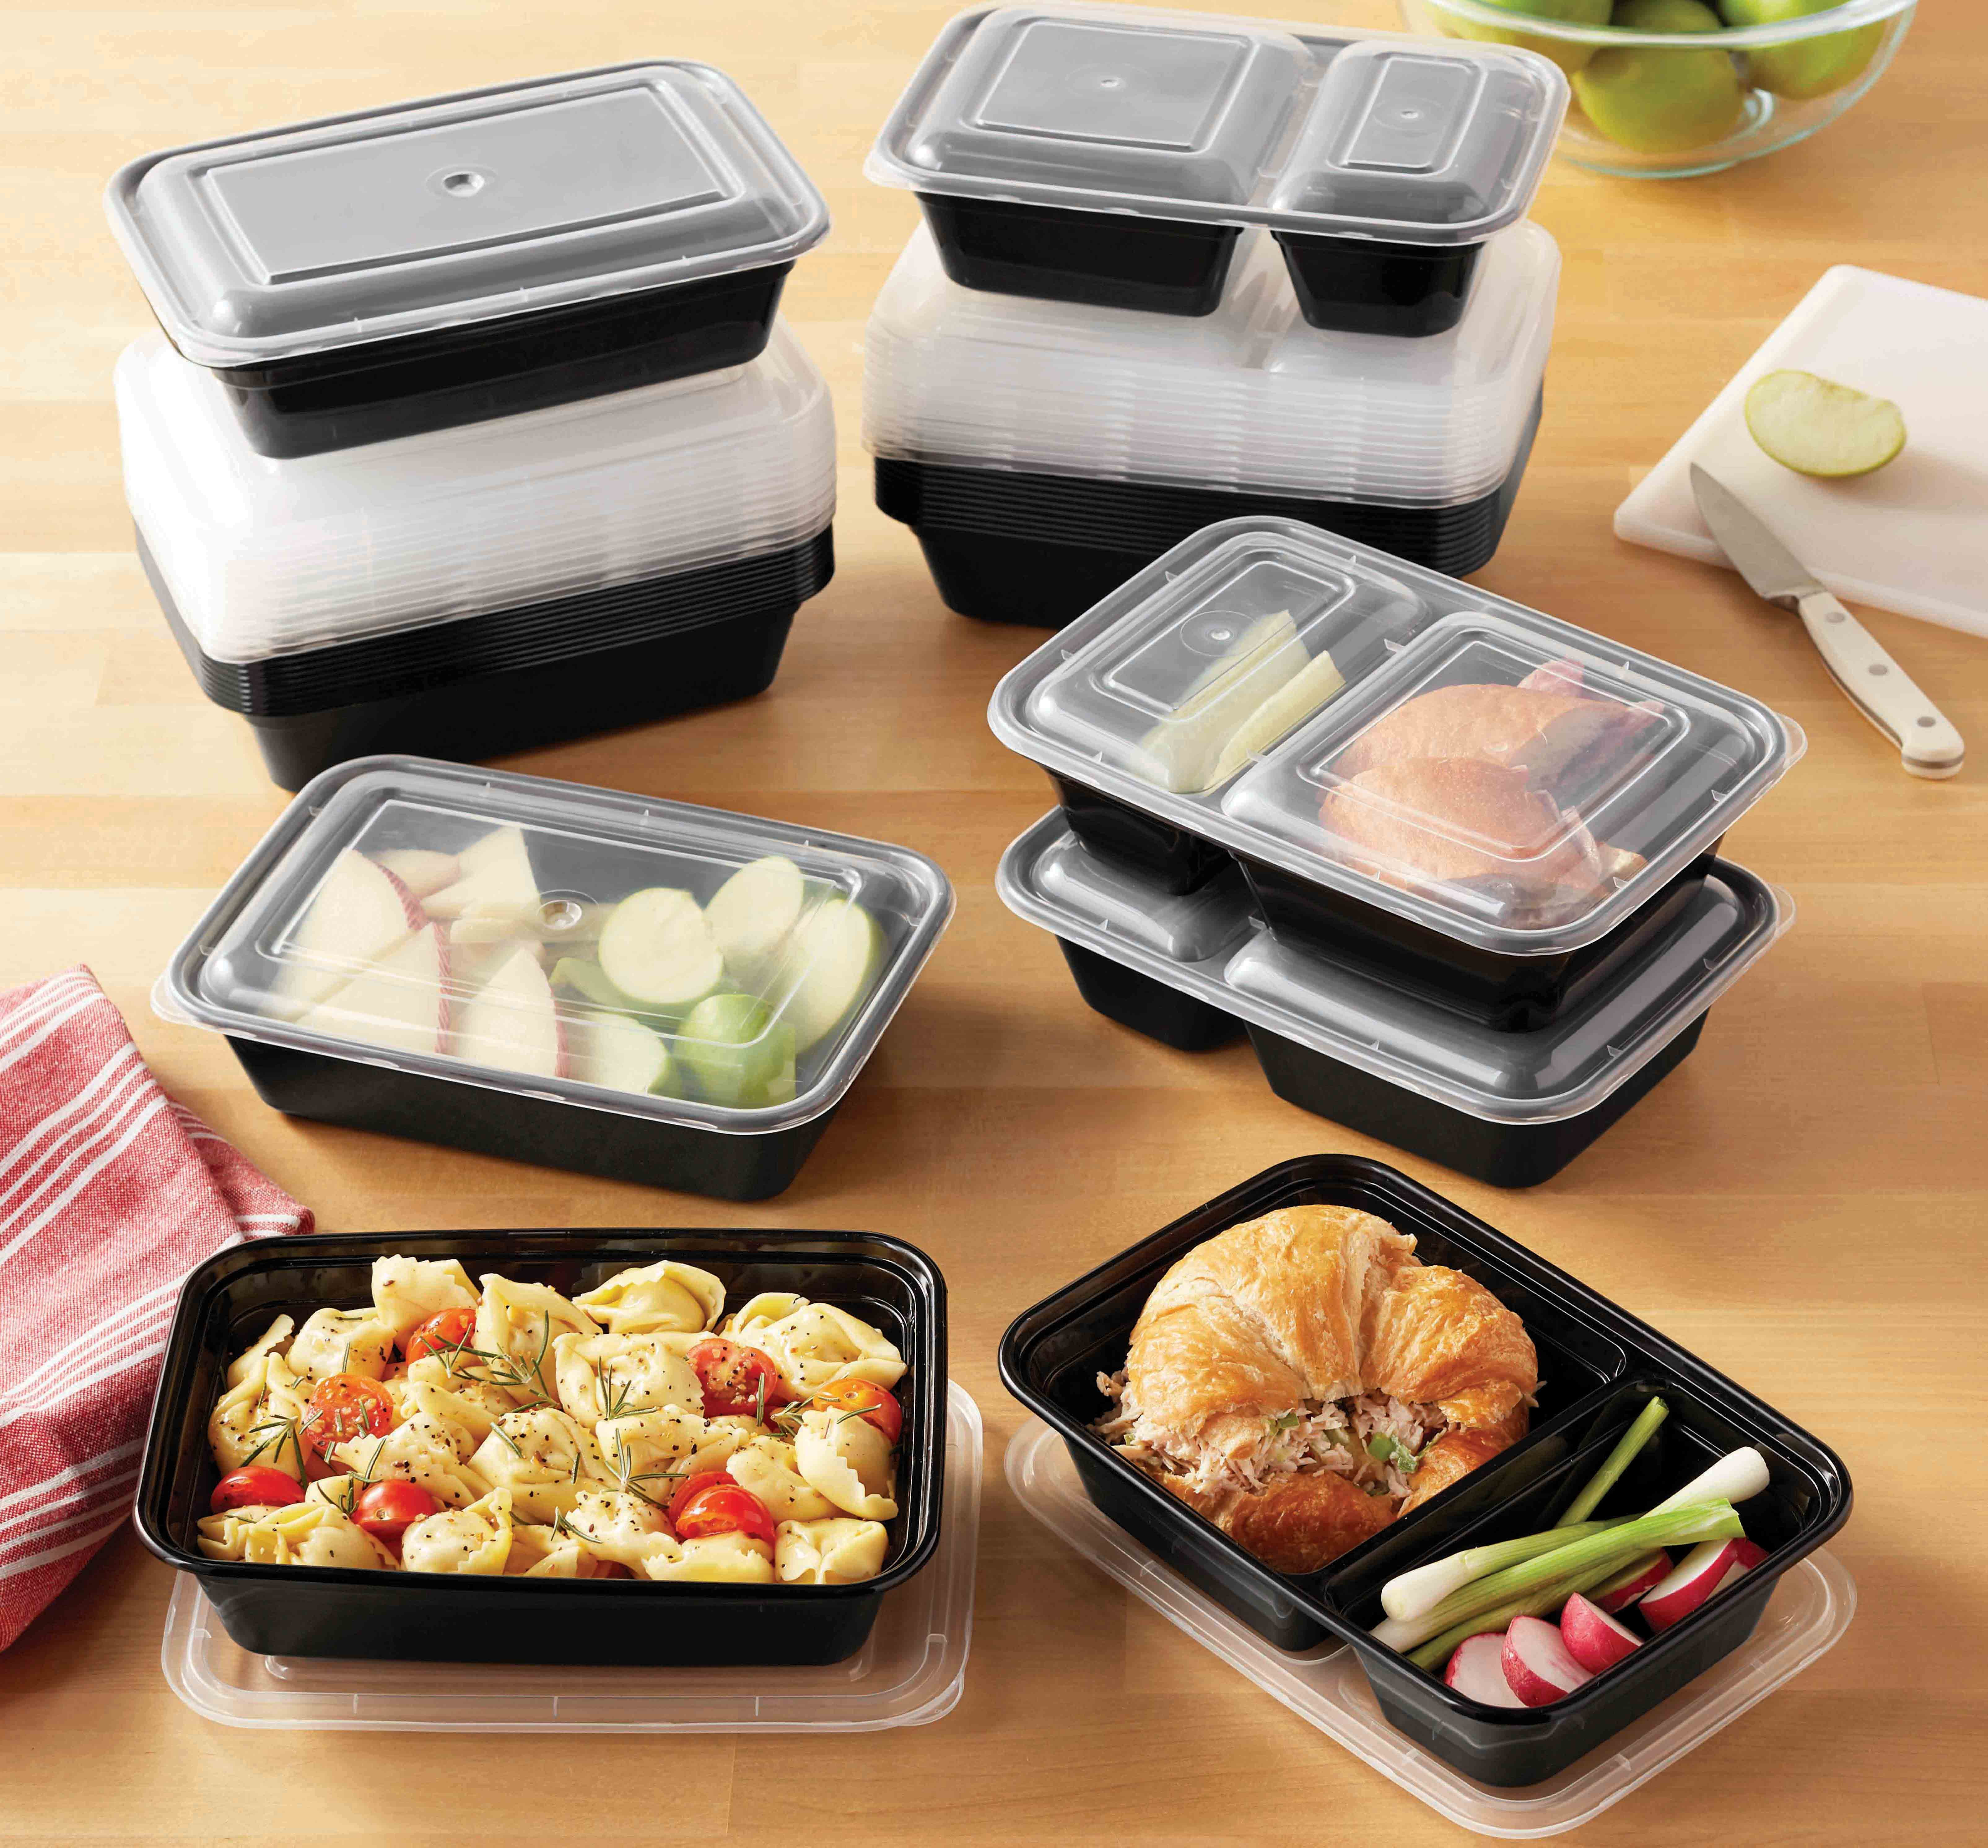 NEW Mainstays 2 Sections Meal Prep Food Storage Containers 5 Pk 10